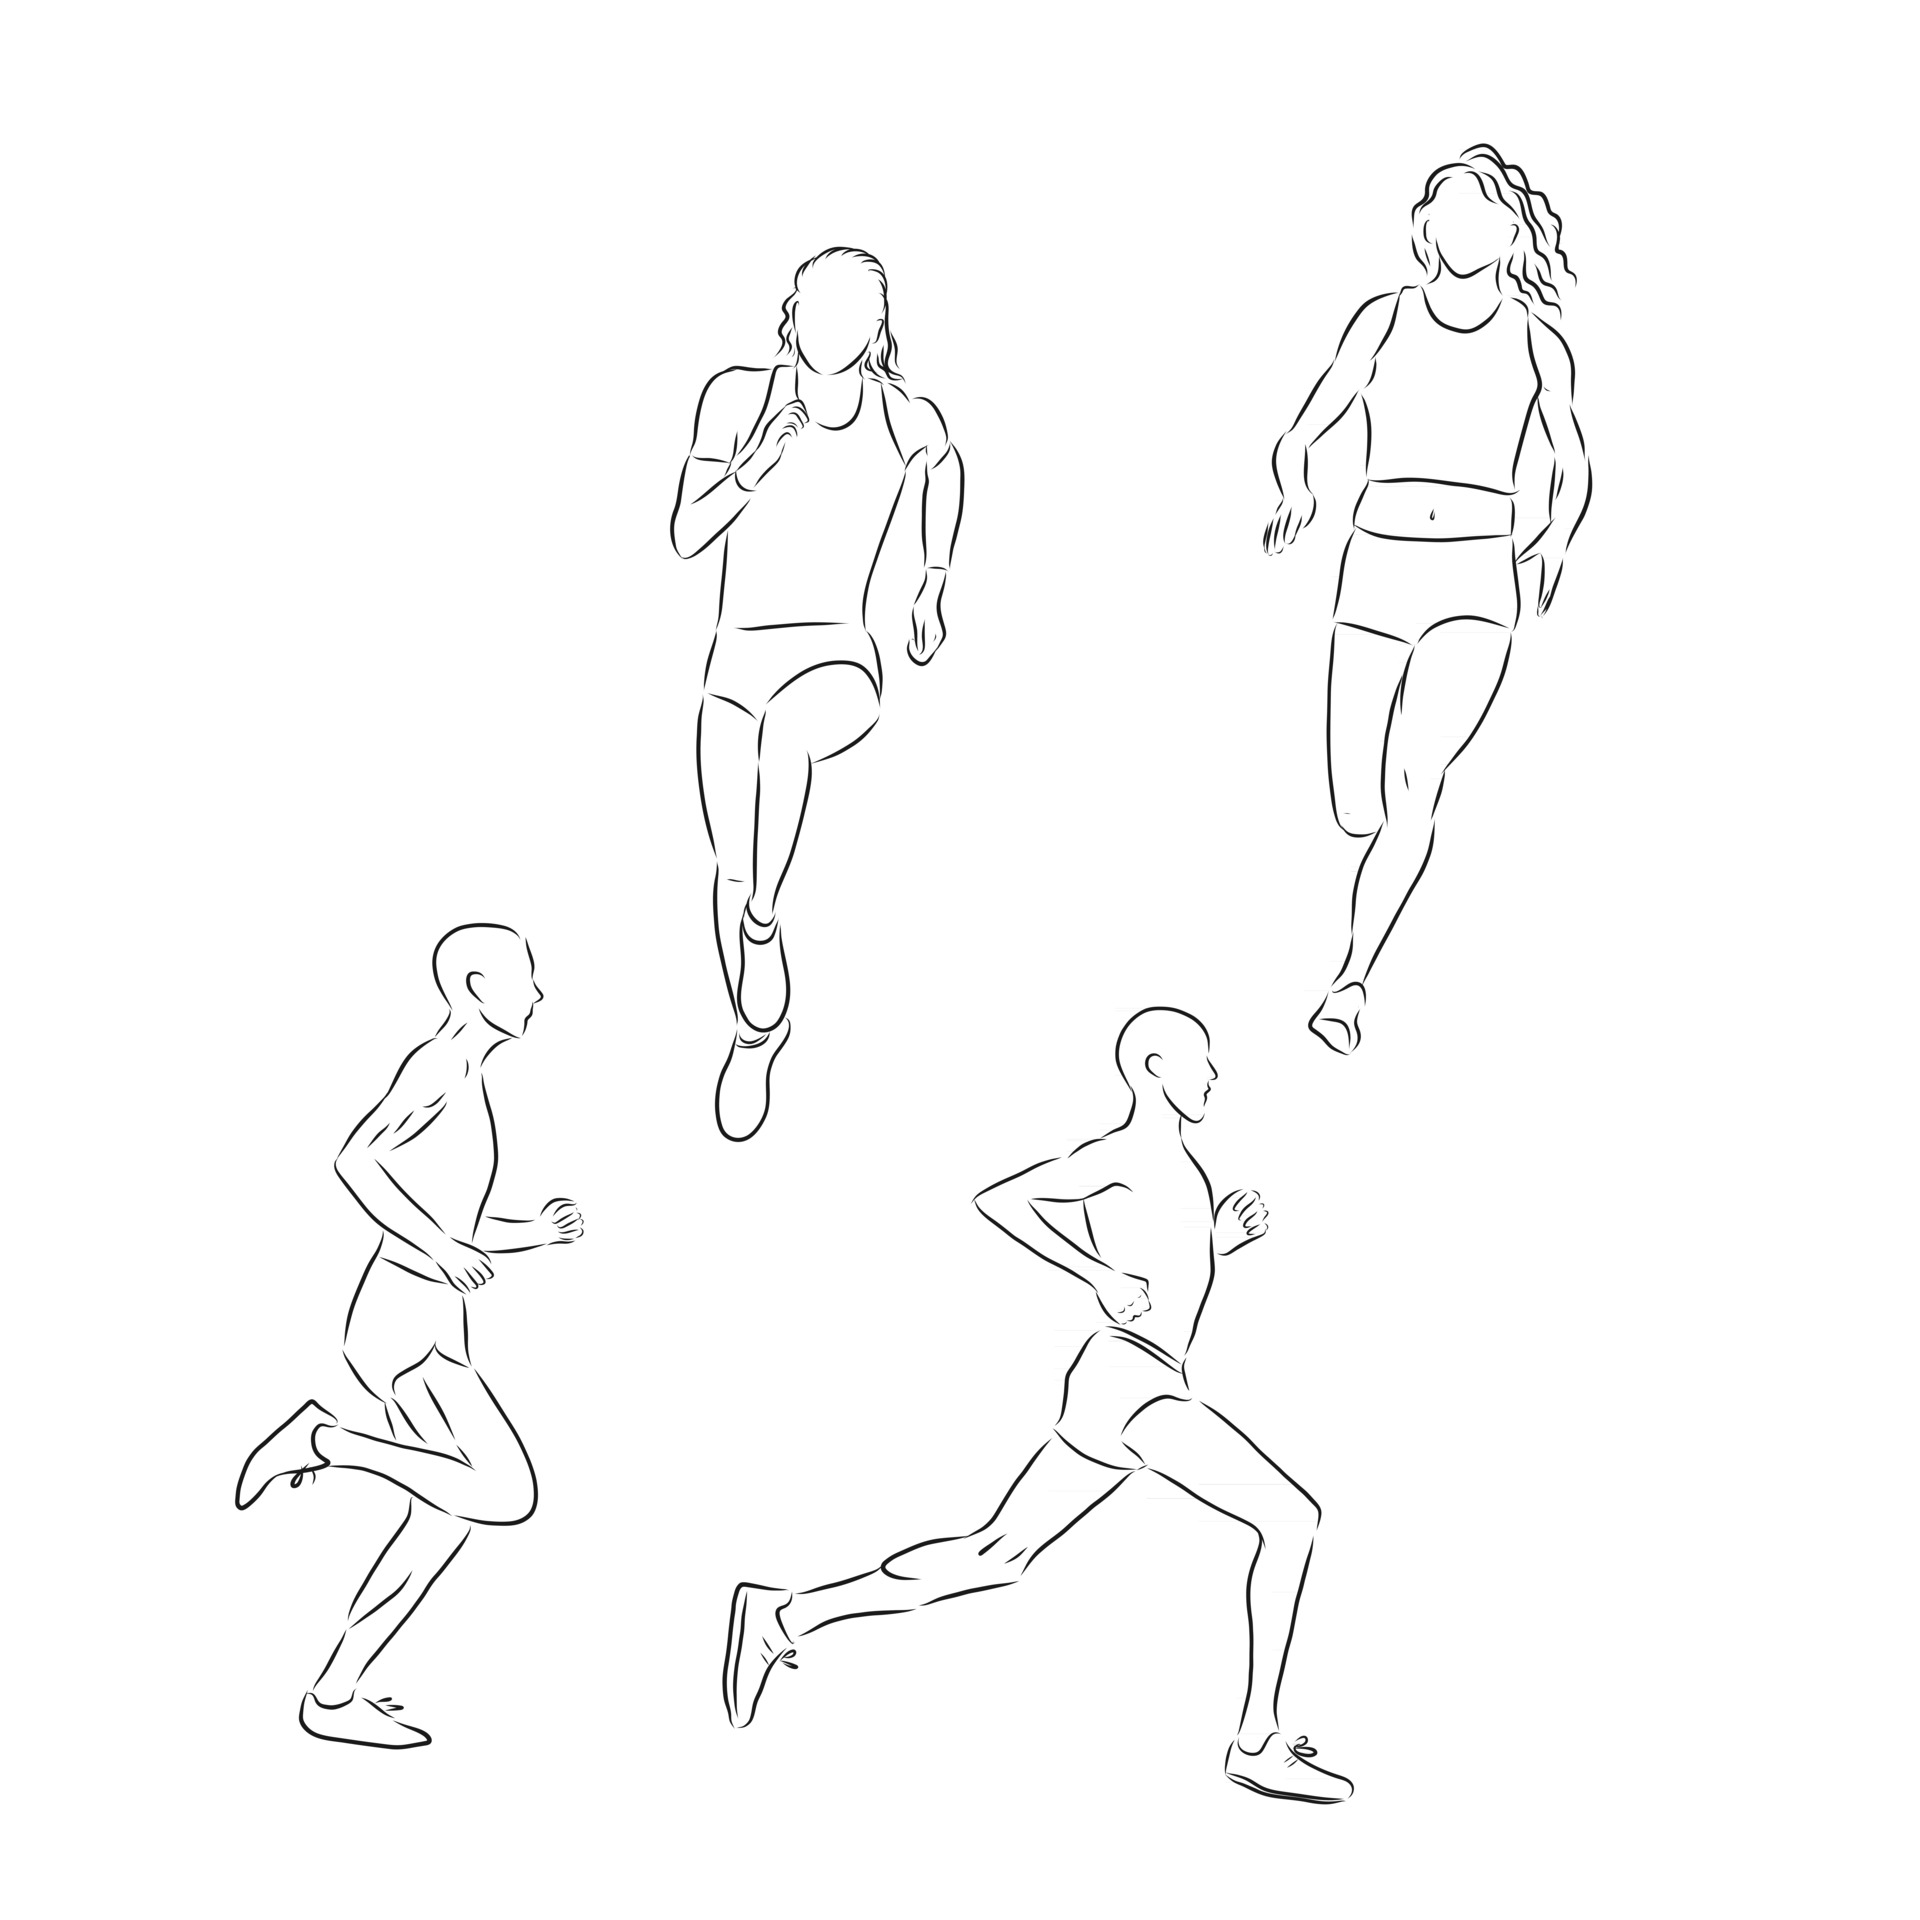 Sketch of running man in doodle style Sketch of running man in doodle  style vector illustration  CanStock